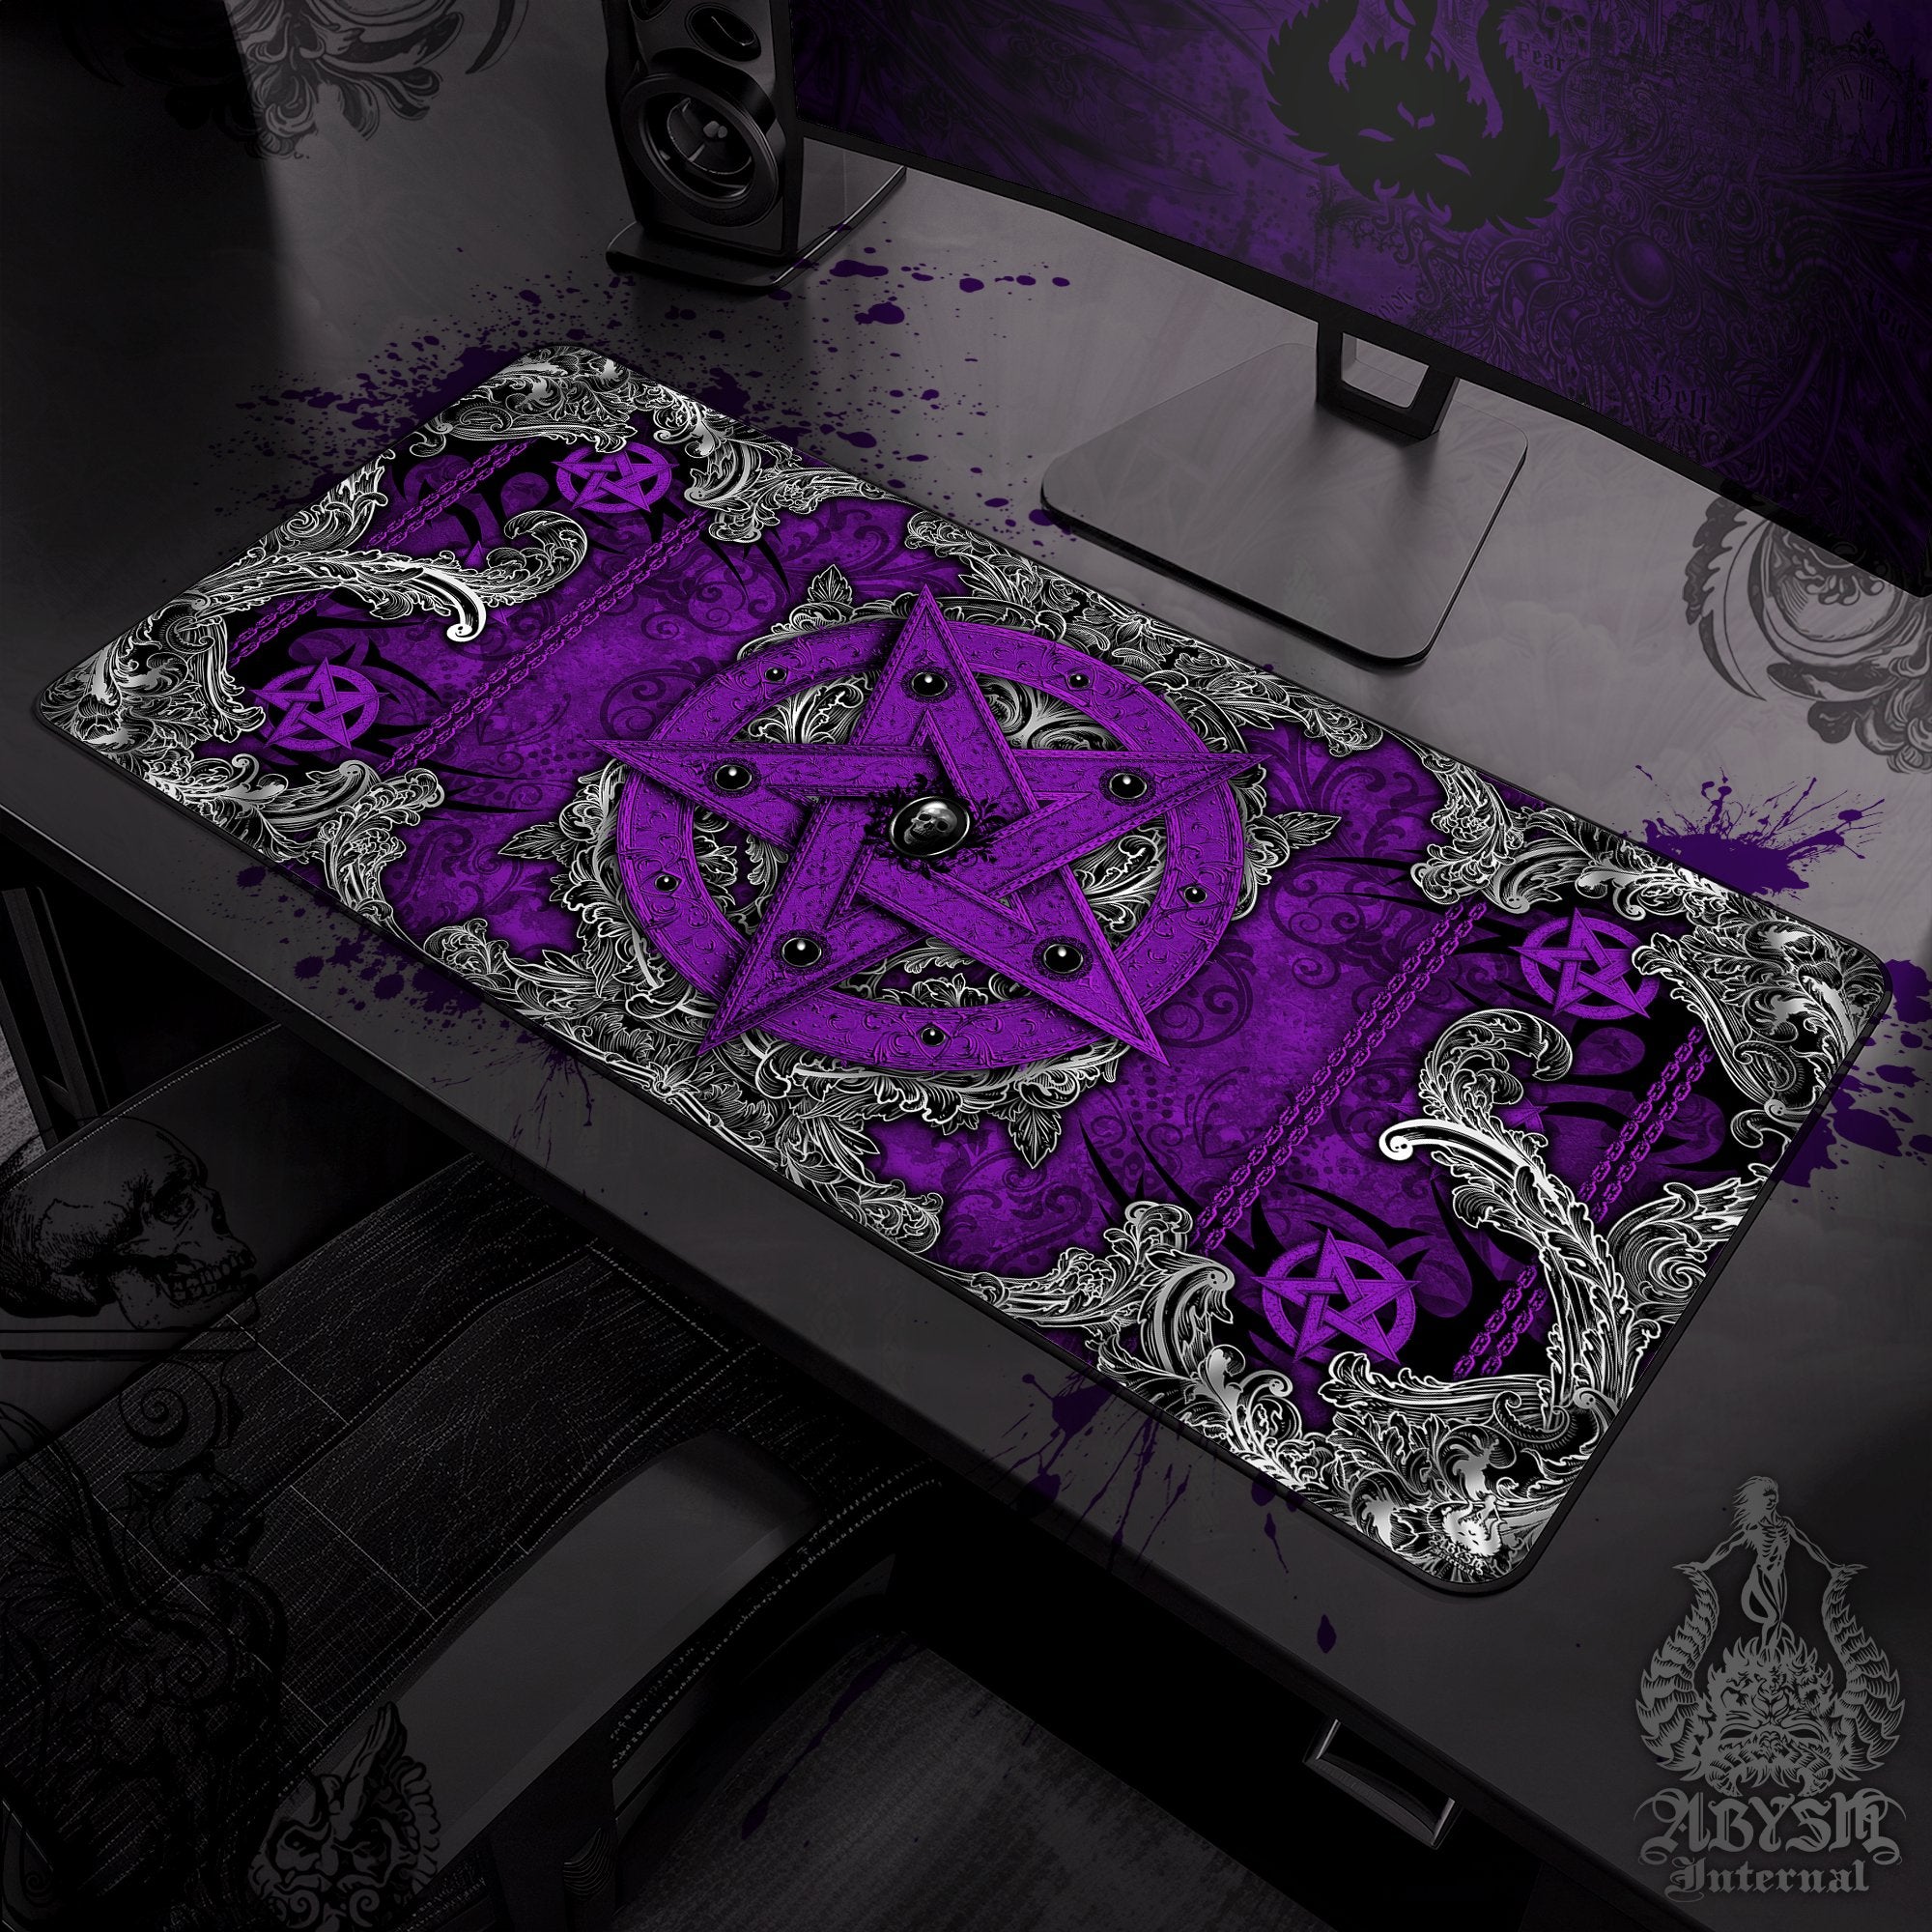 Whimsigoth Desk Mat, Witchy Gaming Mouse Pad, Pastel Goth Table Protector Cover, Purple Pentagram Workpad, Satanic Art Print - 4 Options - Abysm Internal